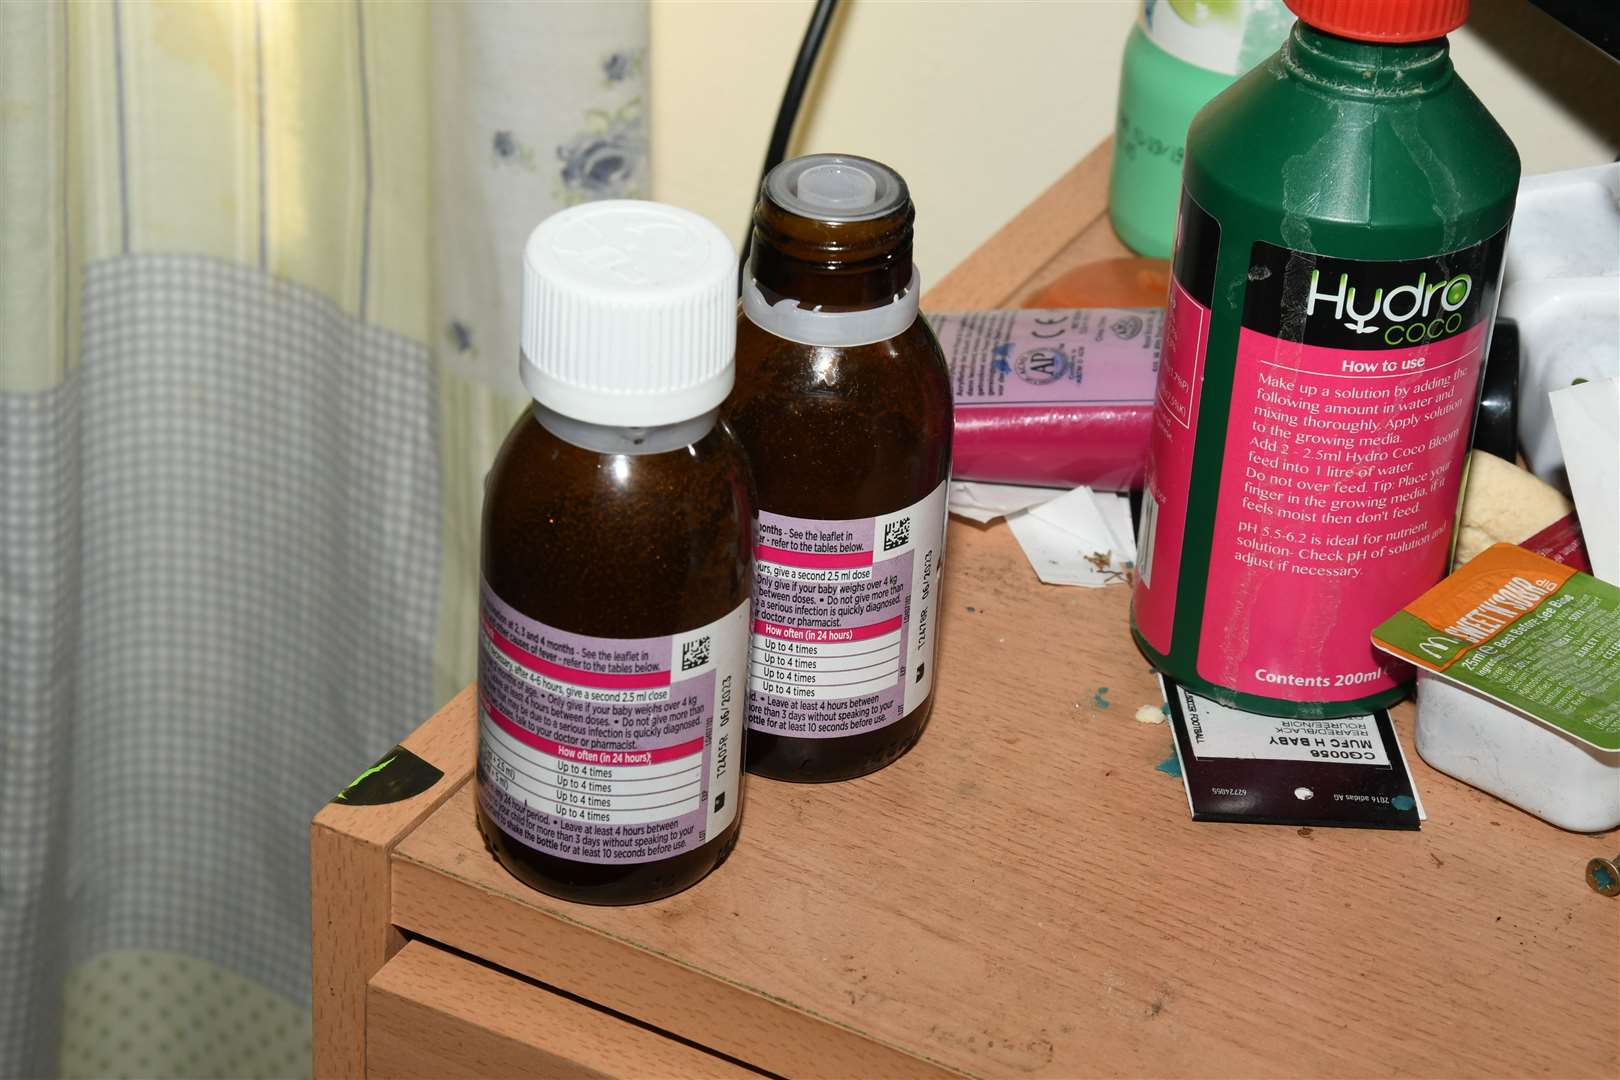 Liquid paracetamol which the couple used to treat Finley’s injuries (Derbyshire Police/PA)